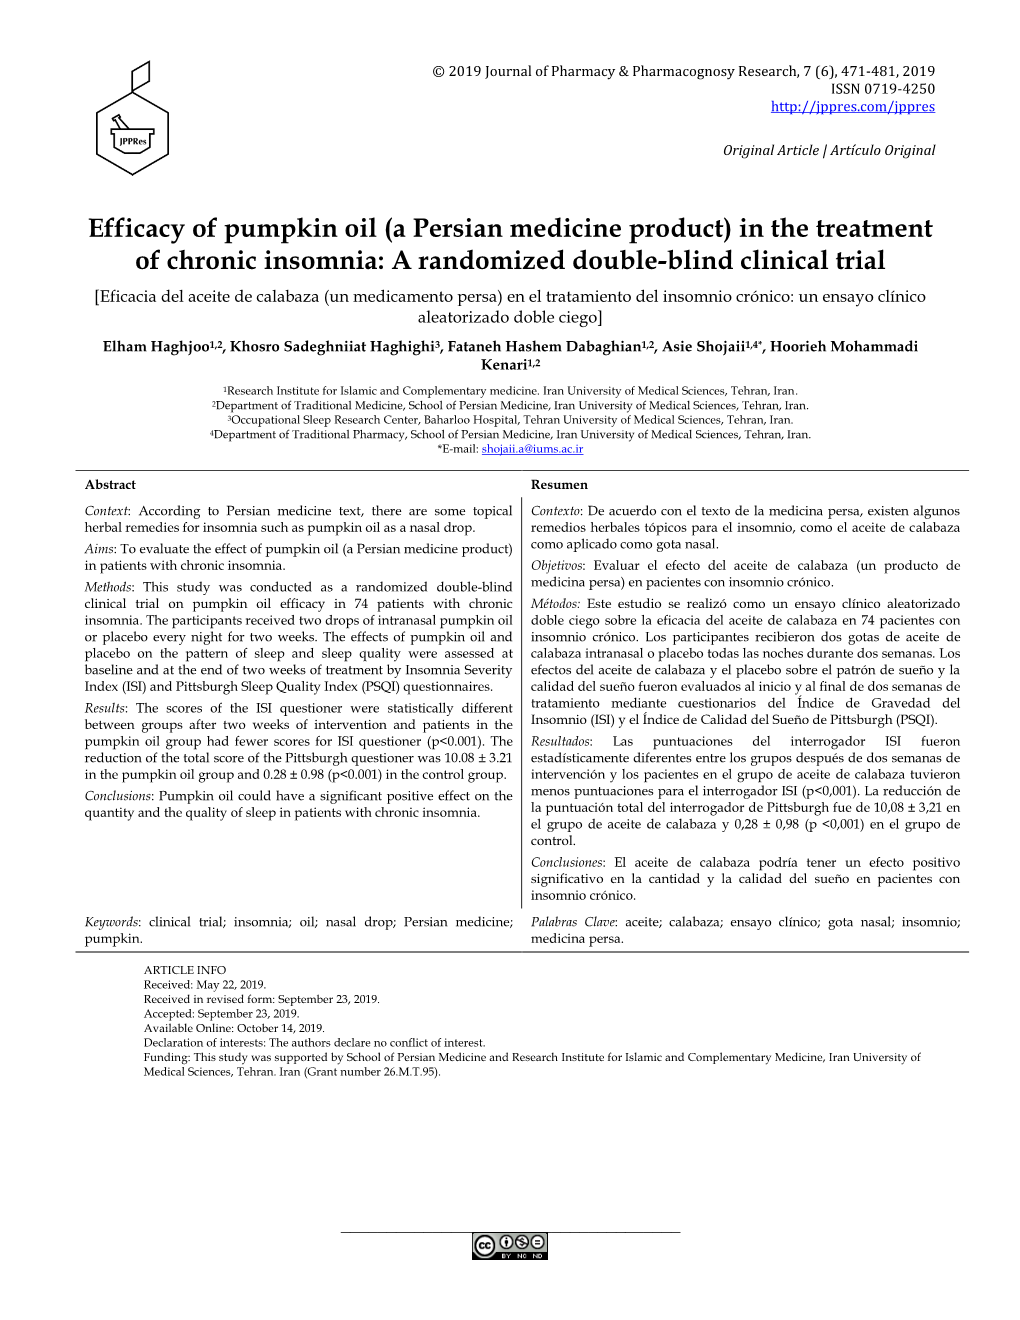 Efficacy of Pumpkin Oil (A Persian Medicine Product) in the Treatment of Chronic Insomnia: a Randomized Double-Blind Clinical Tr